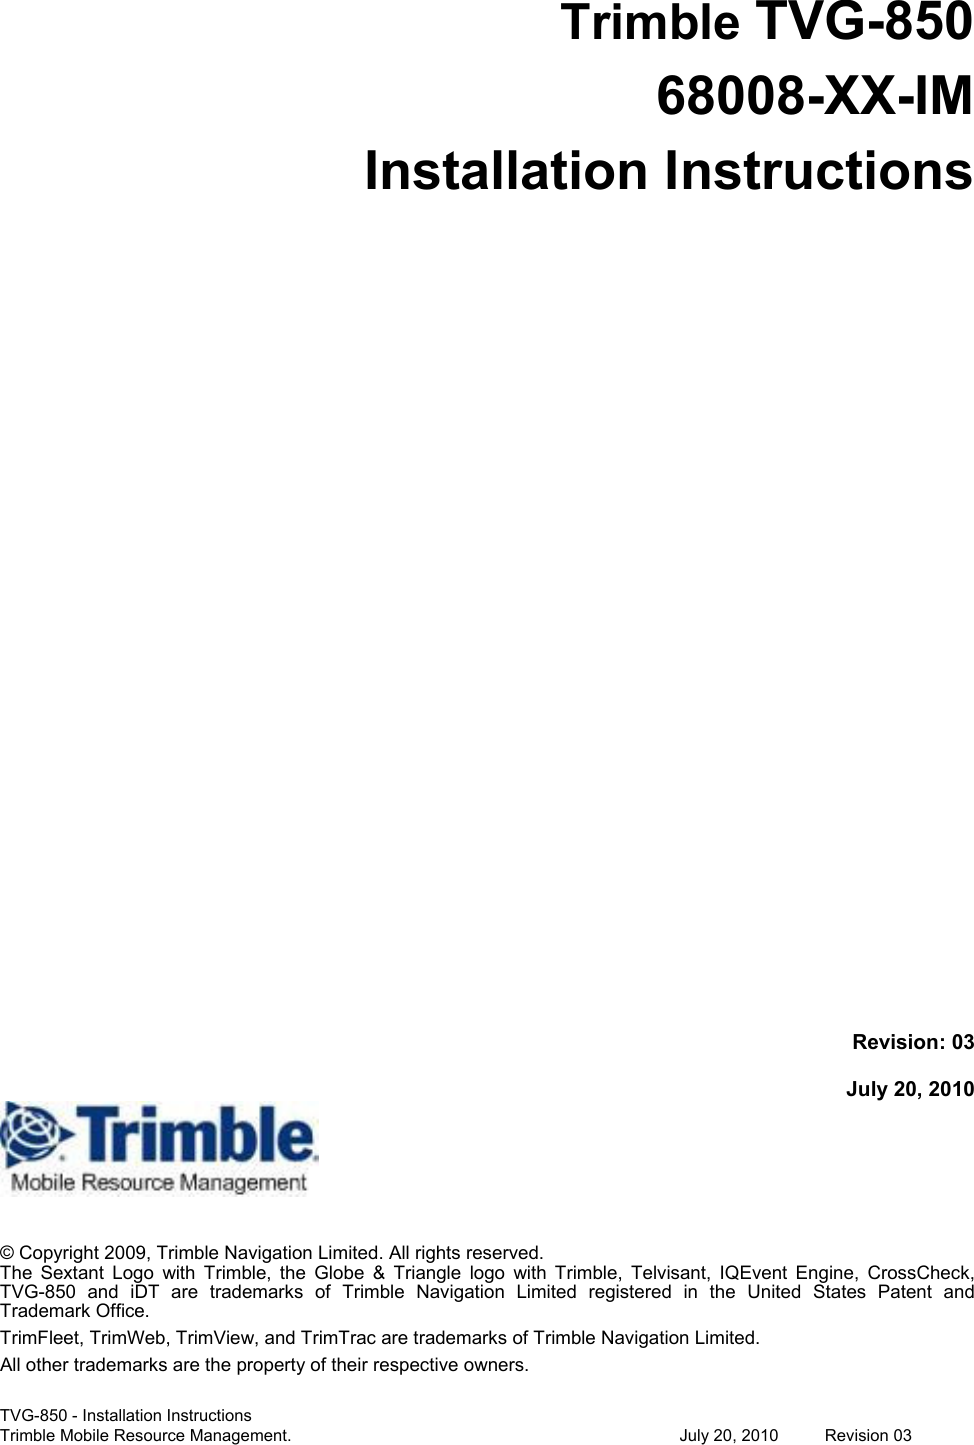 TVG-850 - Installation Instructions Trimble Mobile Resource Management.             July 20, 2010  Revision 03   Trimble TVG-850 68008-XX-IM Installation Instructions                         Revision: 03  July 20, 2010    © Copyright 2009, Trimble Navigation Limited. All rights reserved.  The  Sextant  Logo  with  Trimble,  the  Globe  &amp;  Triangle  logo  with  Trimble,  Telvisant,  IQEvent  Engine,  CrossCheck, TVG-850  and  iDT  are  trademarks  of  Trimble  Navigation  Limited  registered  in  the  United  States  Patent  and Trademark Office. TrimFleet, TrimWeb, TrimView, and TrimTrac are trademarks of Trimble Navigation Limited. All other trademarks are the property of their respective owners. 